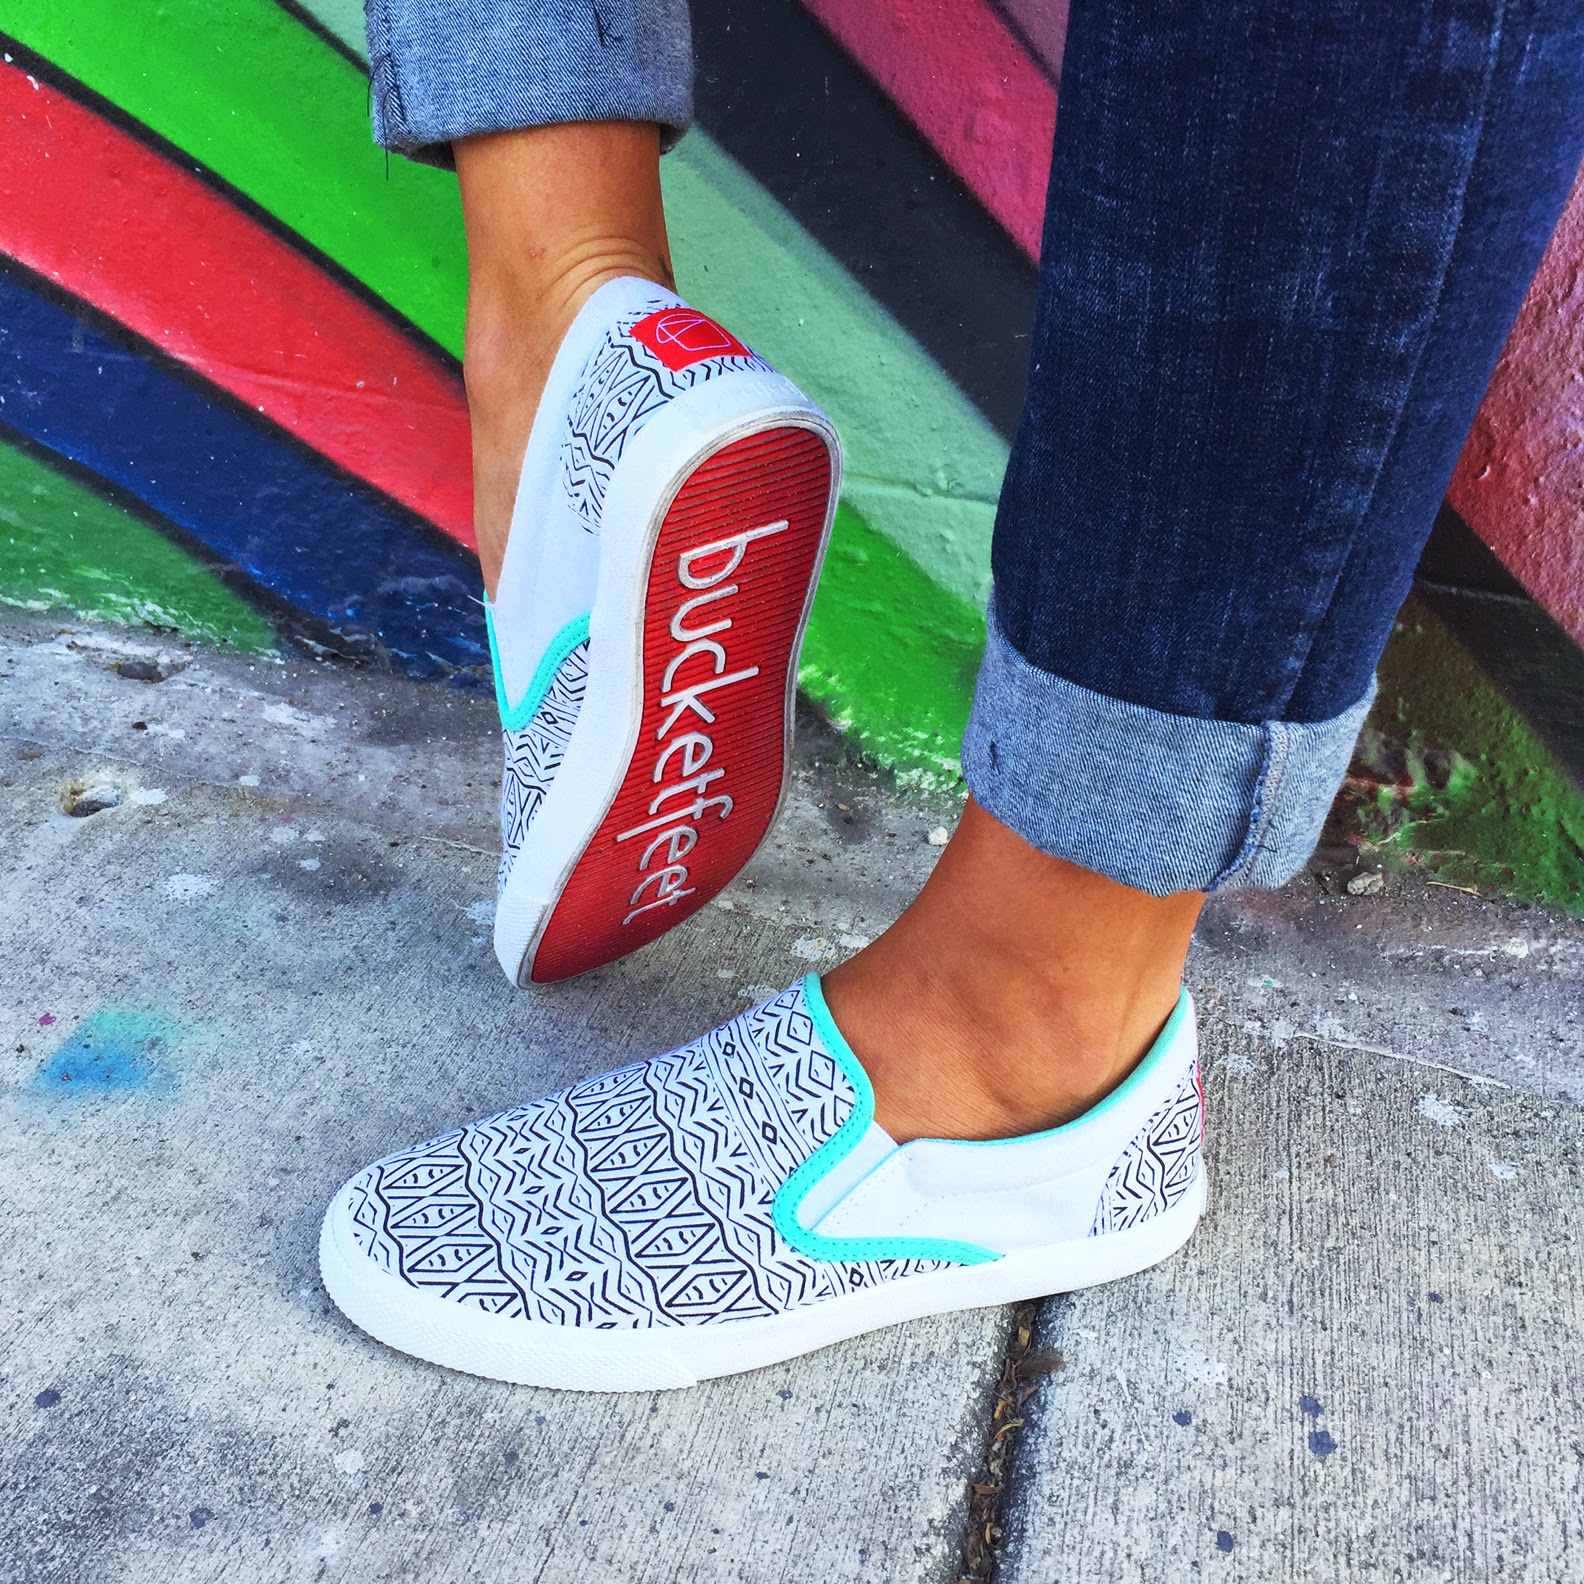 http://www1.bloomingdales.com/shop/product/bucketfeet-flat-slip-on-sneakers-tambourine-line-print?ID=1237458&CategoryID=16961#fn=spp%3D2%26ppp%3D96%26sp%3DNull%26rid%3DNull%26cm_kws%3Dtambourine